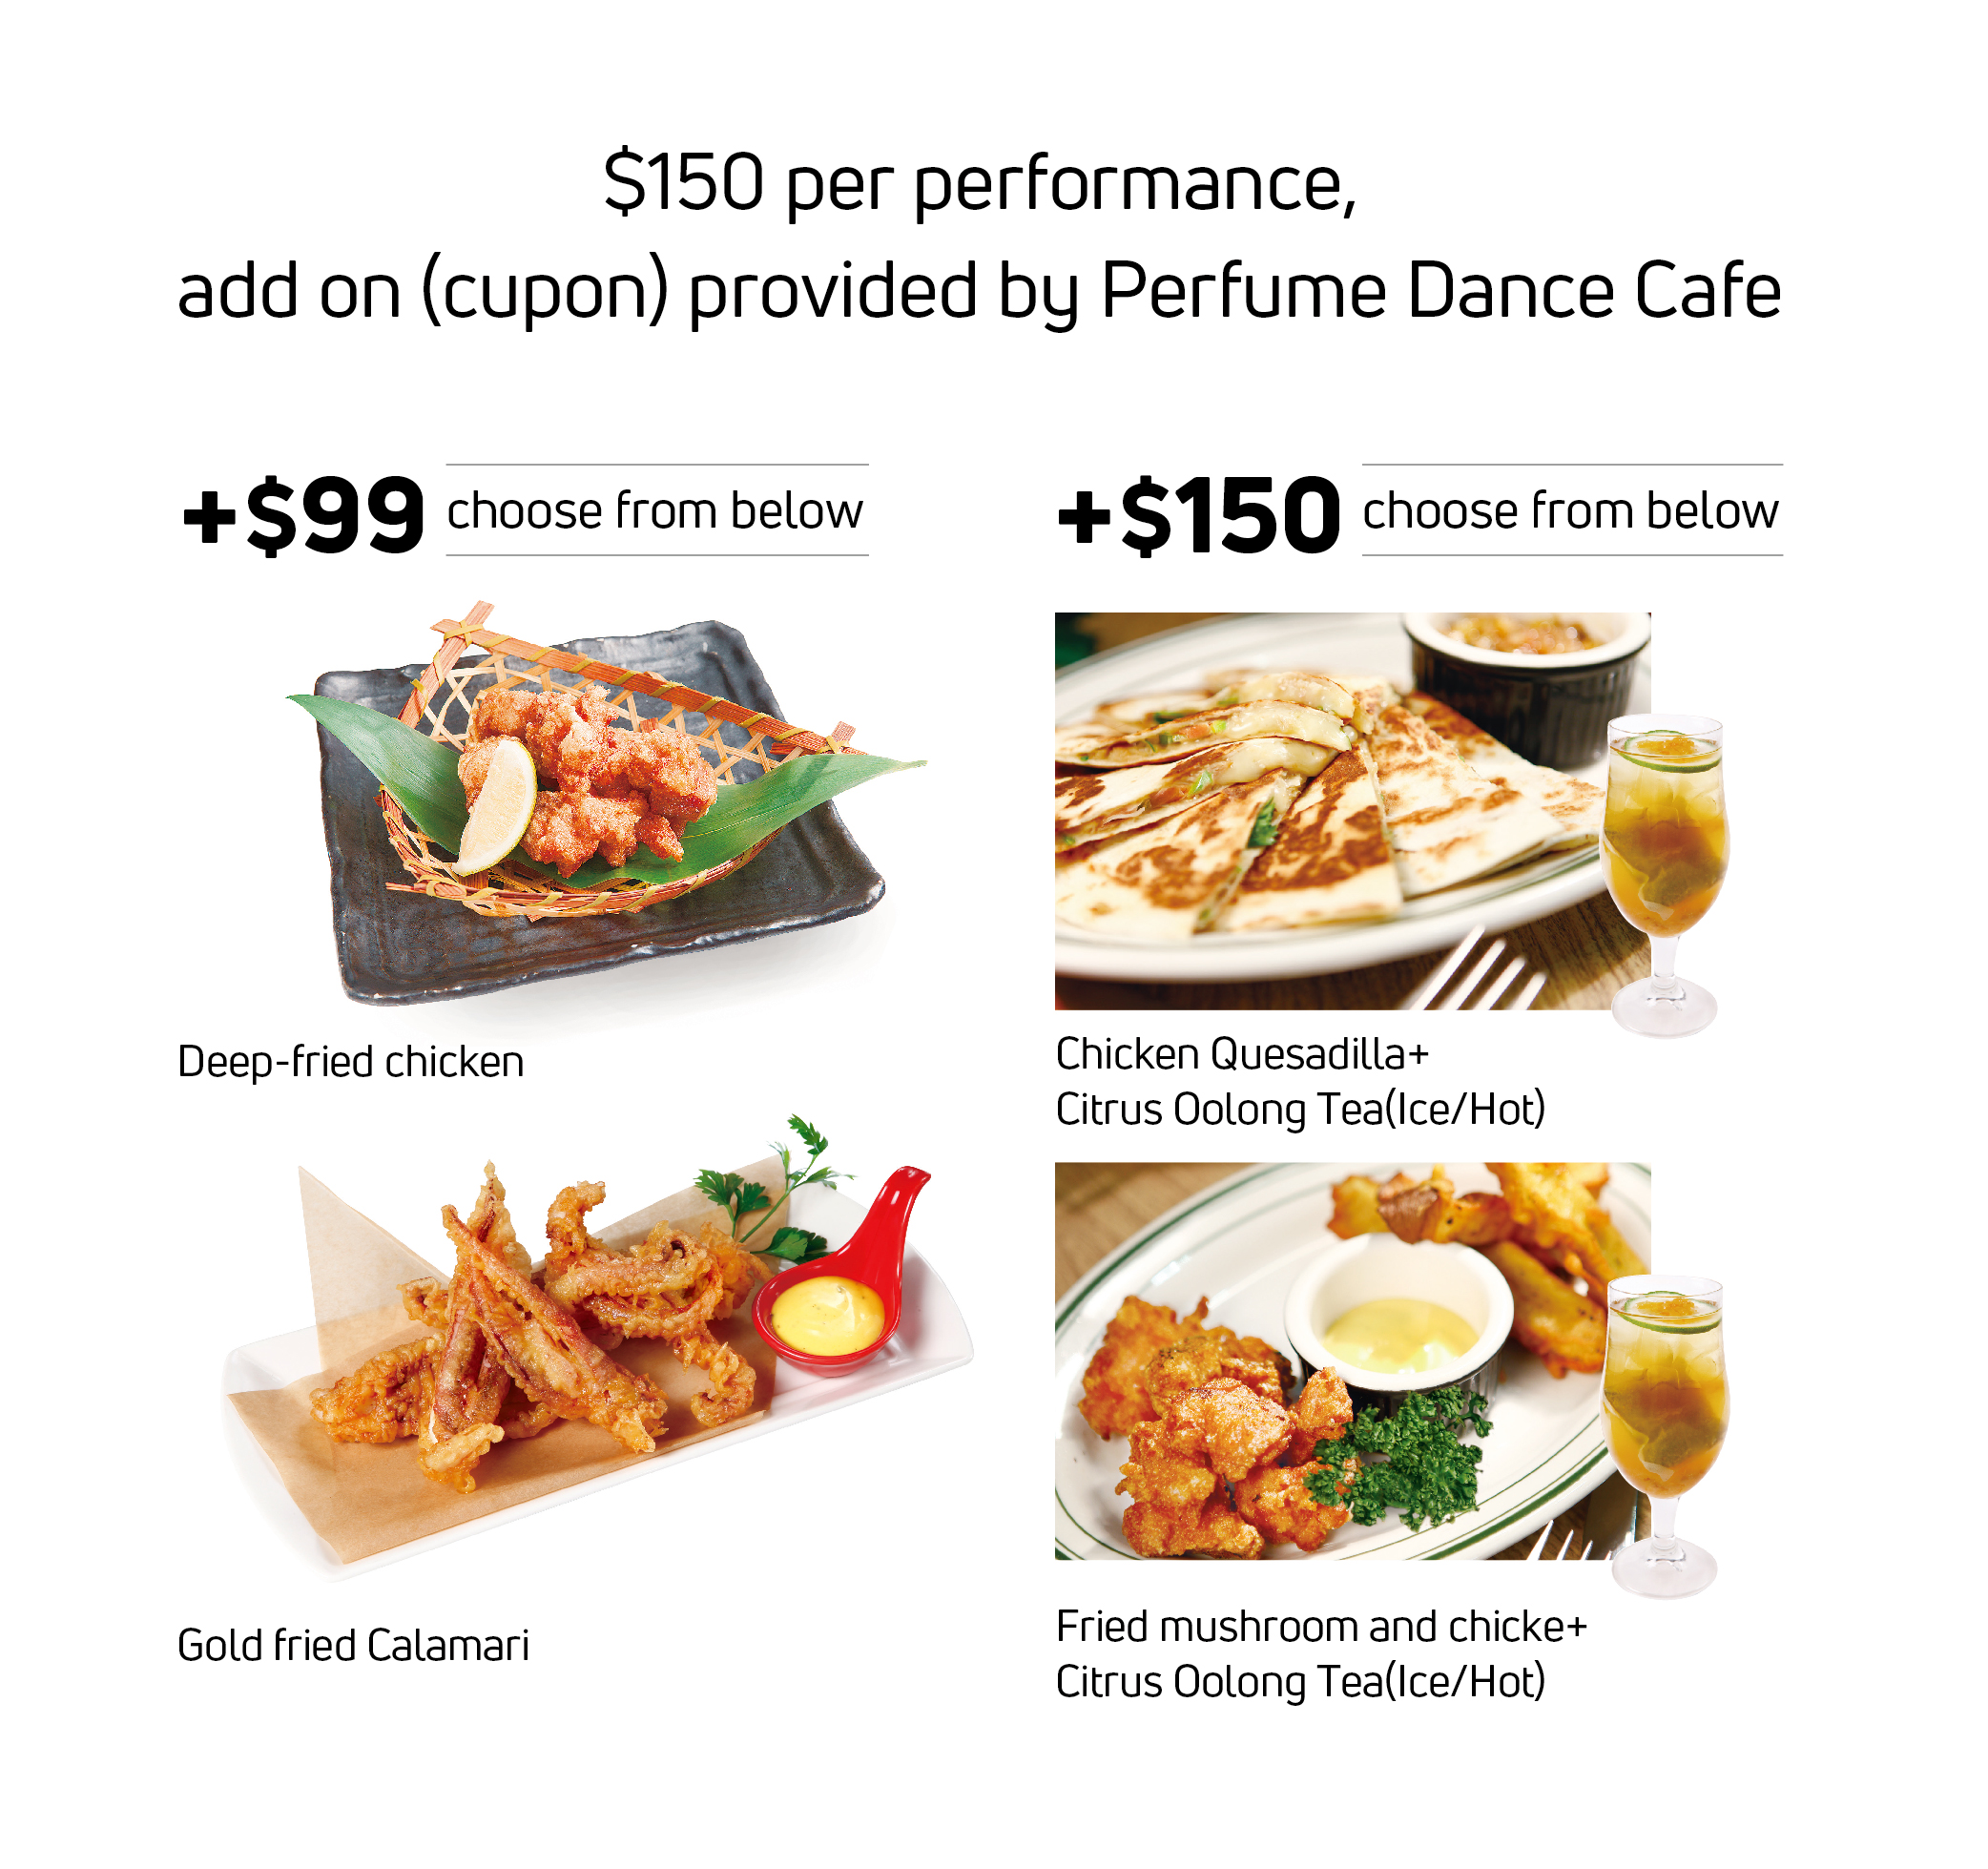 $150 per performance,add on provided by Perfume Dance Cafe.